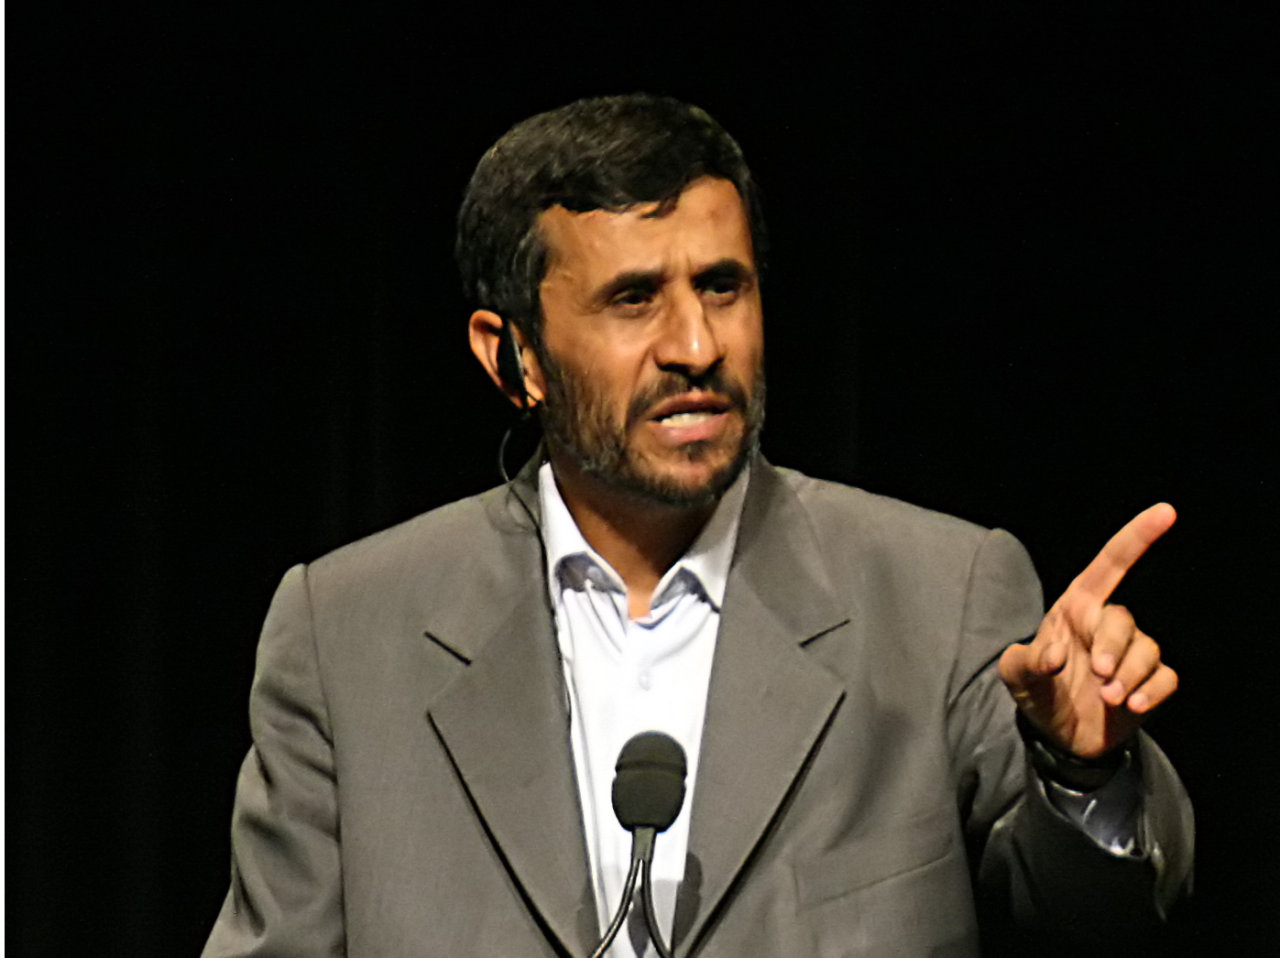 Ahmadinejad reveals several ways of overcoming tough economic situation in Iran